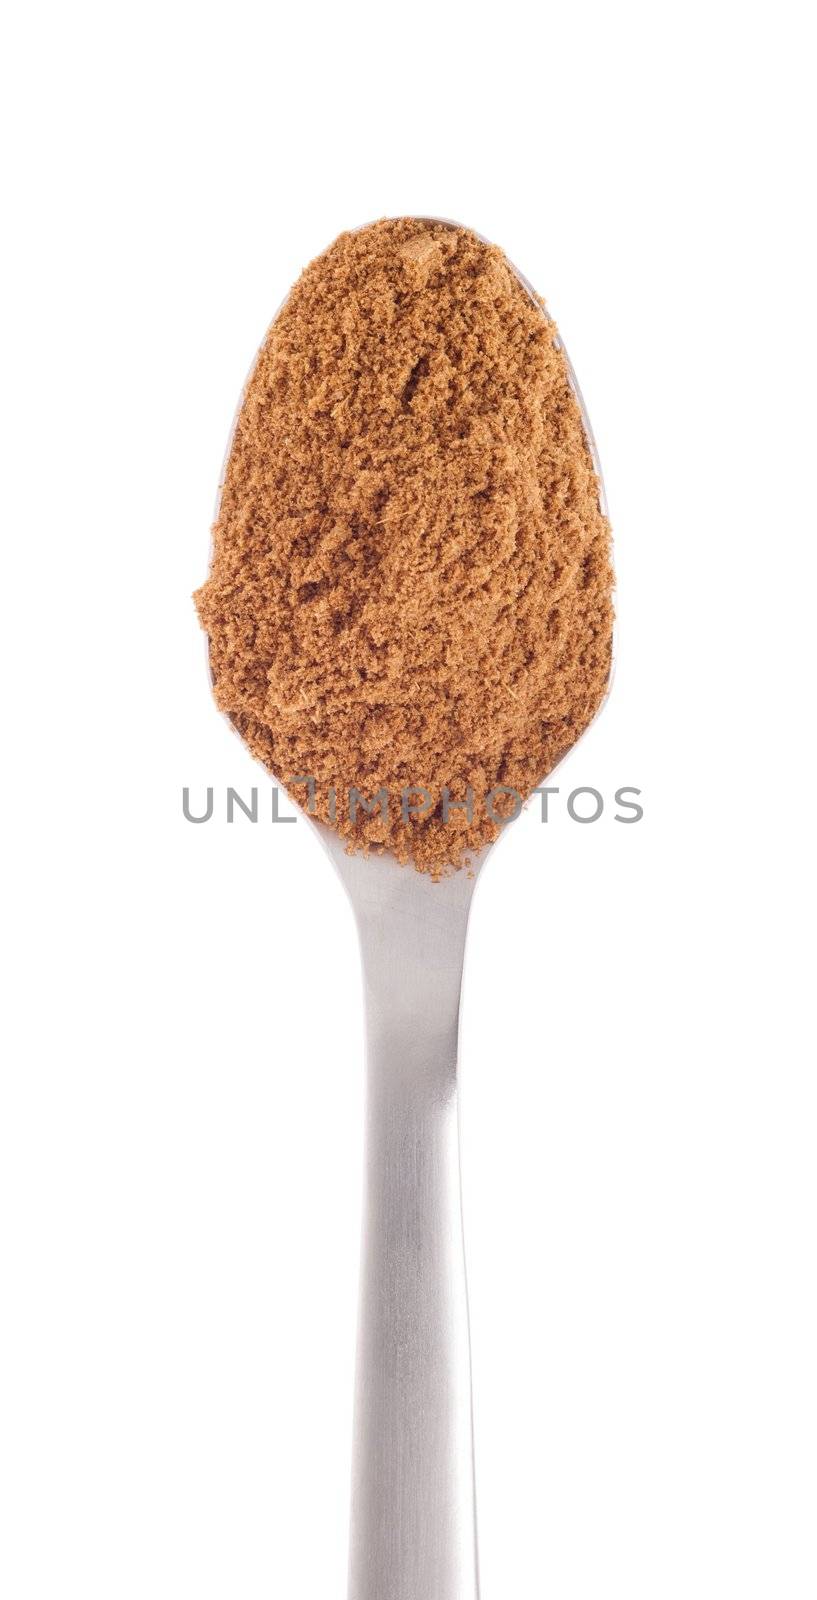 cumin spice on a stainless steel spoon, isolated on white background